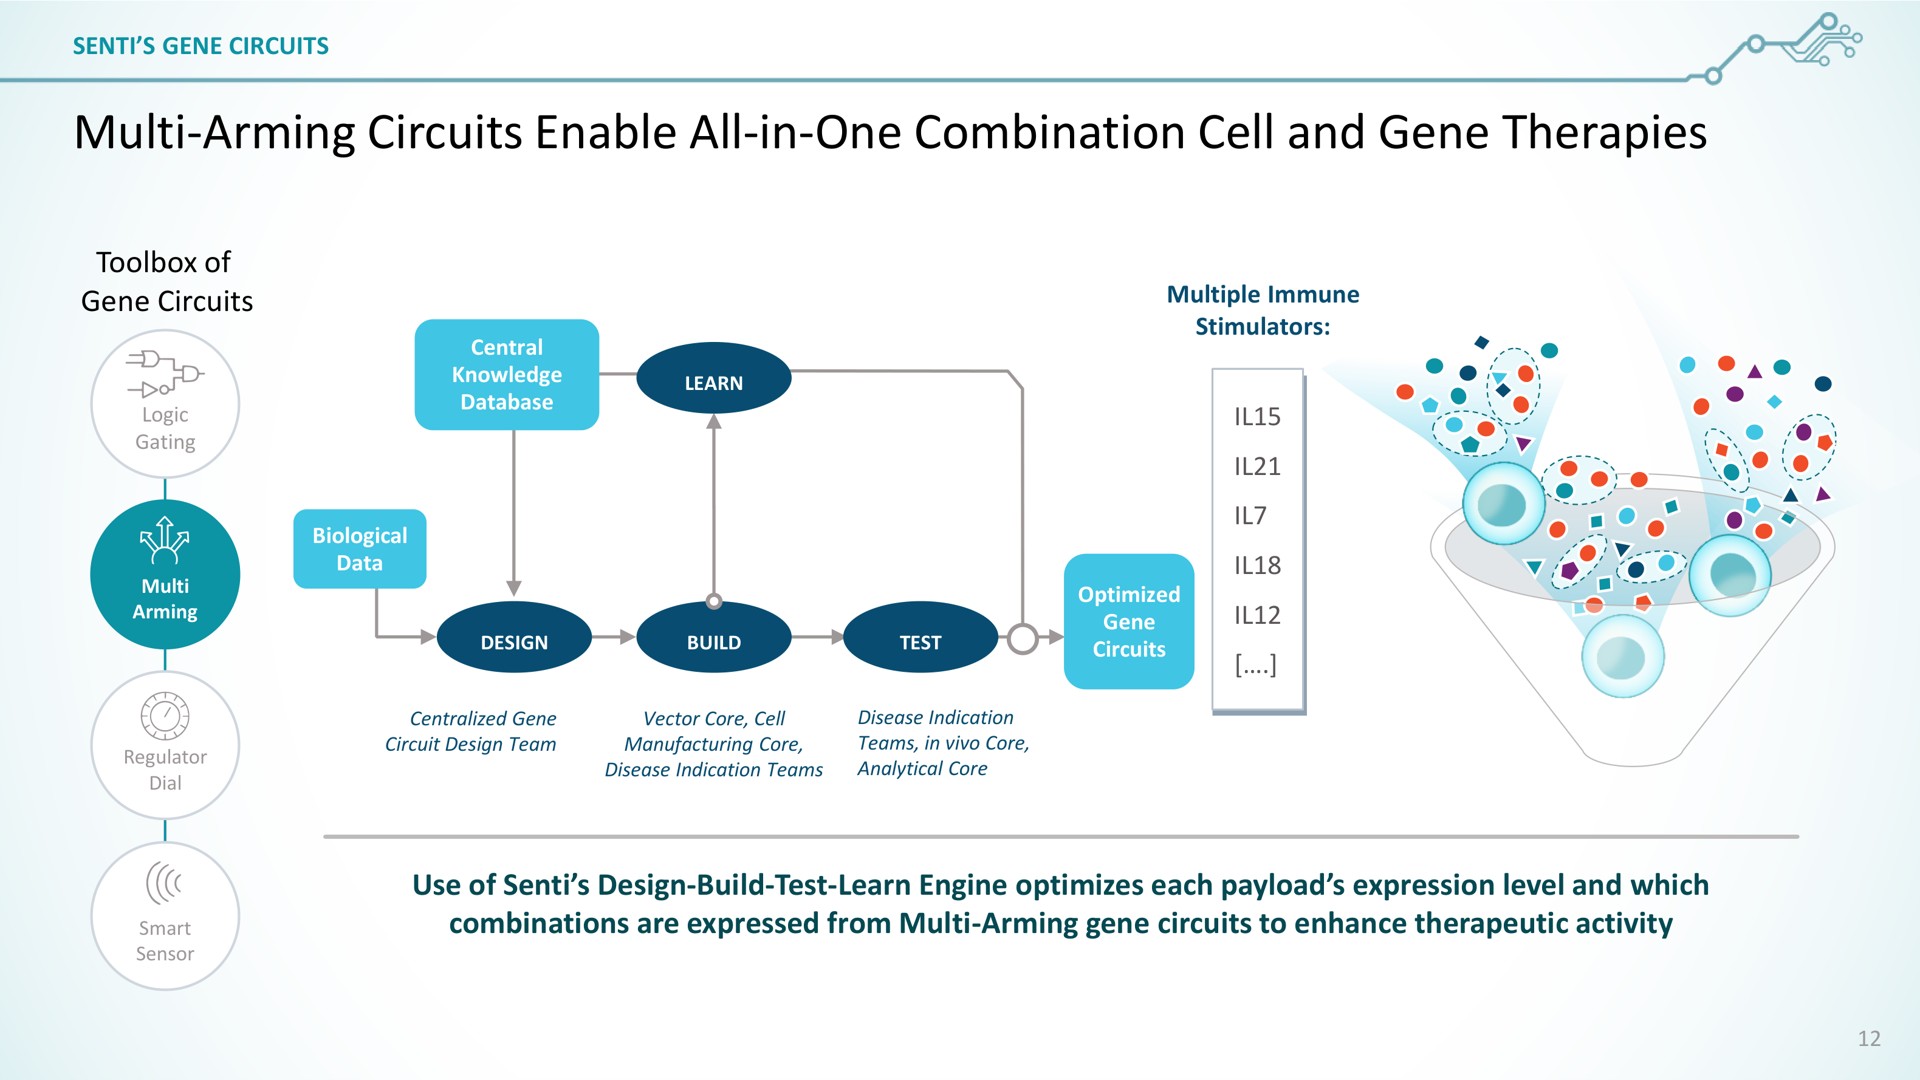 arming circuits enable all in one combination cell and gene therapies | SentiBio